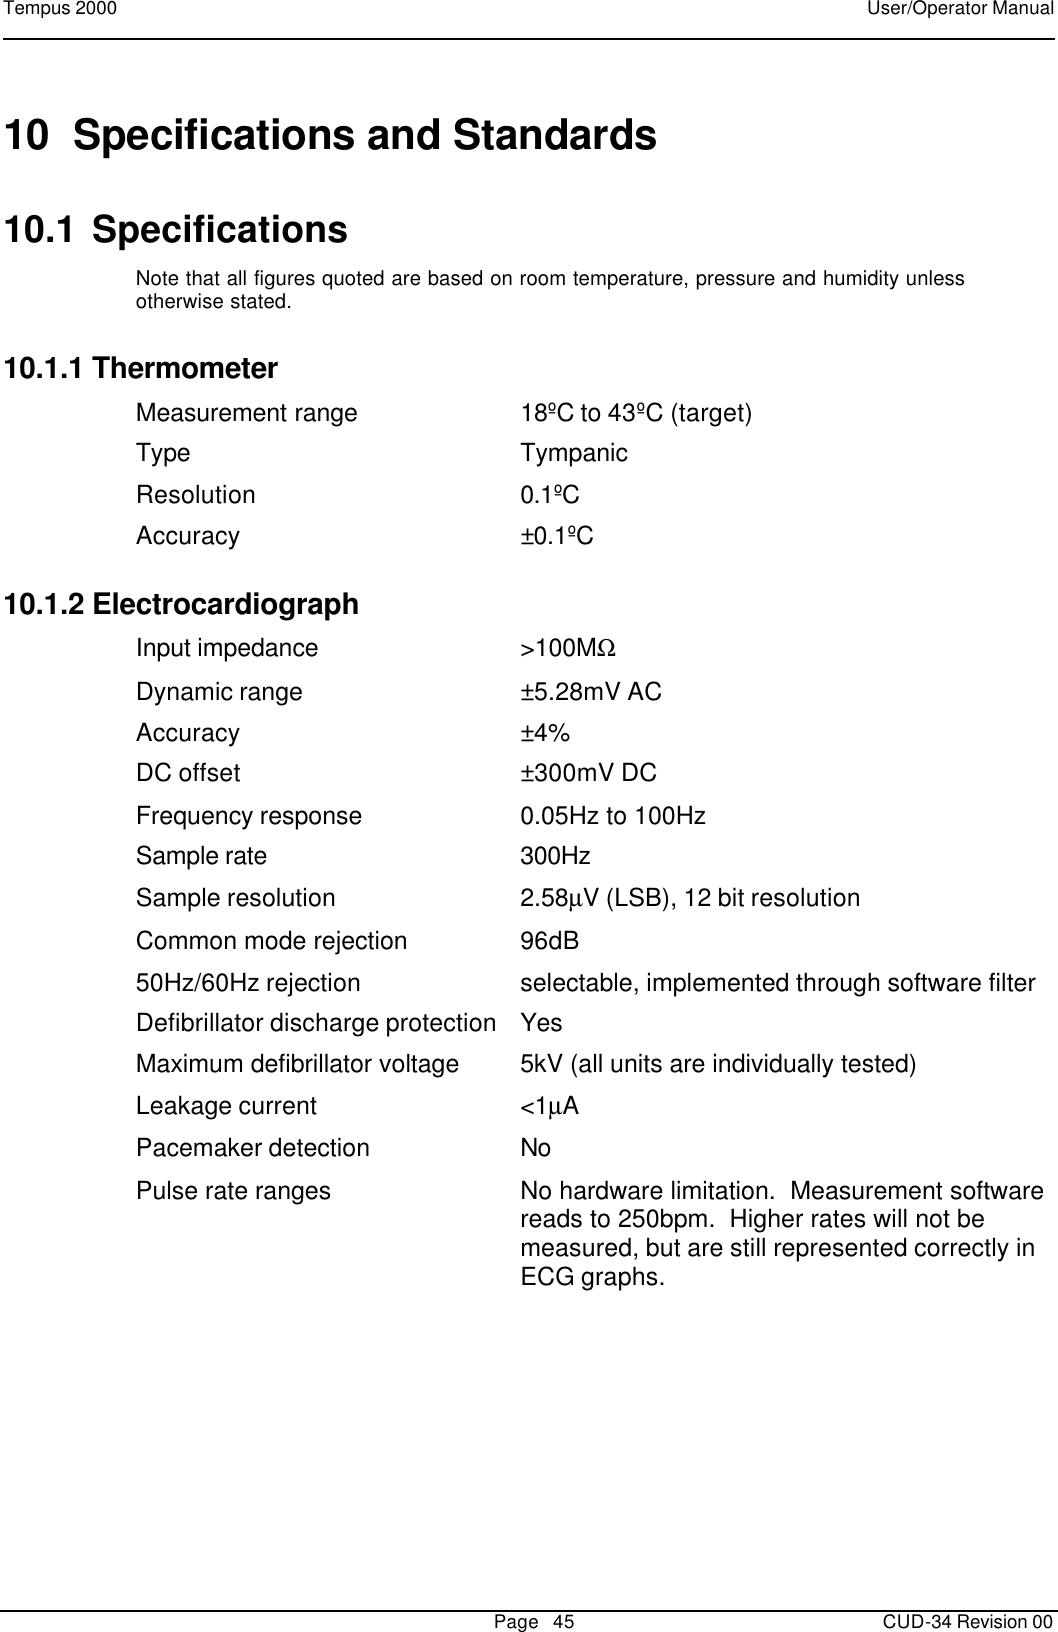 Tempus 2000    User/Operator Manual       Page   45   CUD-34 Revision 00 10 Specifications and Standards 10.1 Specifications Note that all figures quoted are based on room temperature, pressure and humidity unless otherwise stated.  10.1.1 Thermometer Measurement range 18ºC to 43ºC (target) Type Tympanic Resolution 0.1ºC Accuracy ±0.1ºC 10.1.2 Electrocardiograph Input impedance &gt;100MΩ Dynamic range ±5.28mV AC Accuracy ±4% DC offset ±300mV DC Frequency response 0.05Hz to 100Hz Sample rate 300Hz Sample resolution 2.58µV (LSB), 12 bit resolution Common mode rejection 96dB 50Hz/60Hz rejection selectable, implemented through software filter Defibrillator discharge protection Yes Maximum defibrillator voltage 5kV (all units are individually tested) Leakage current &lt;1µA Pacemaker detection No Pulse rate ranges No hardware limitation.  Measurement software reads to 250bpm.  Higher rates will not be measured, but are still represented correctly in ECG graphs. 